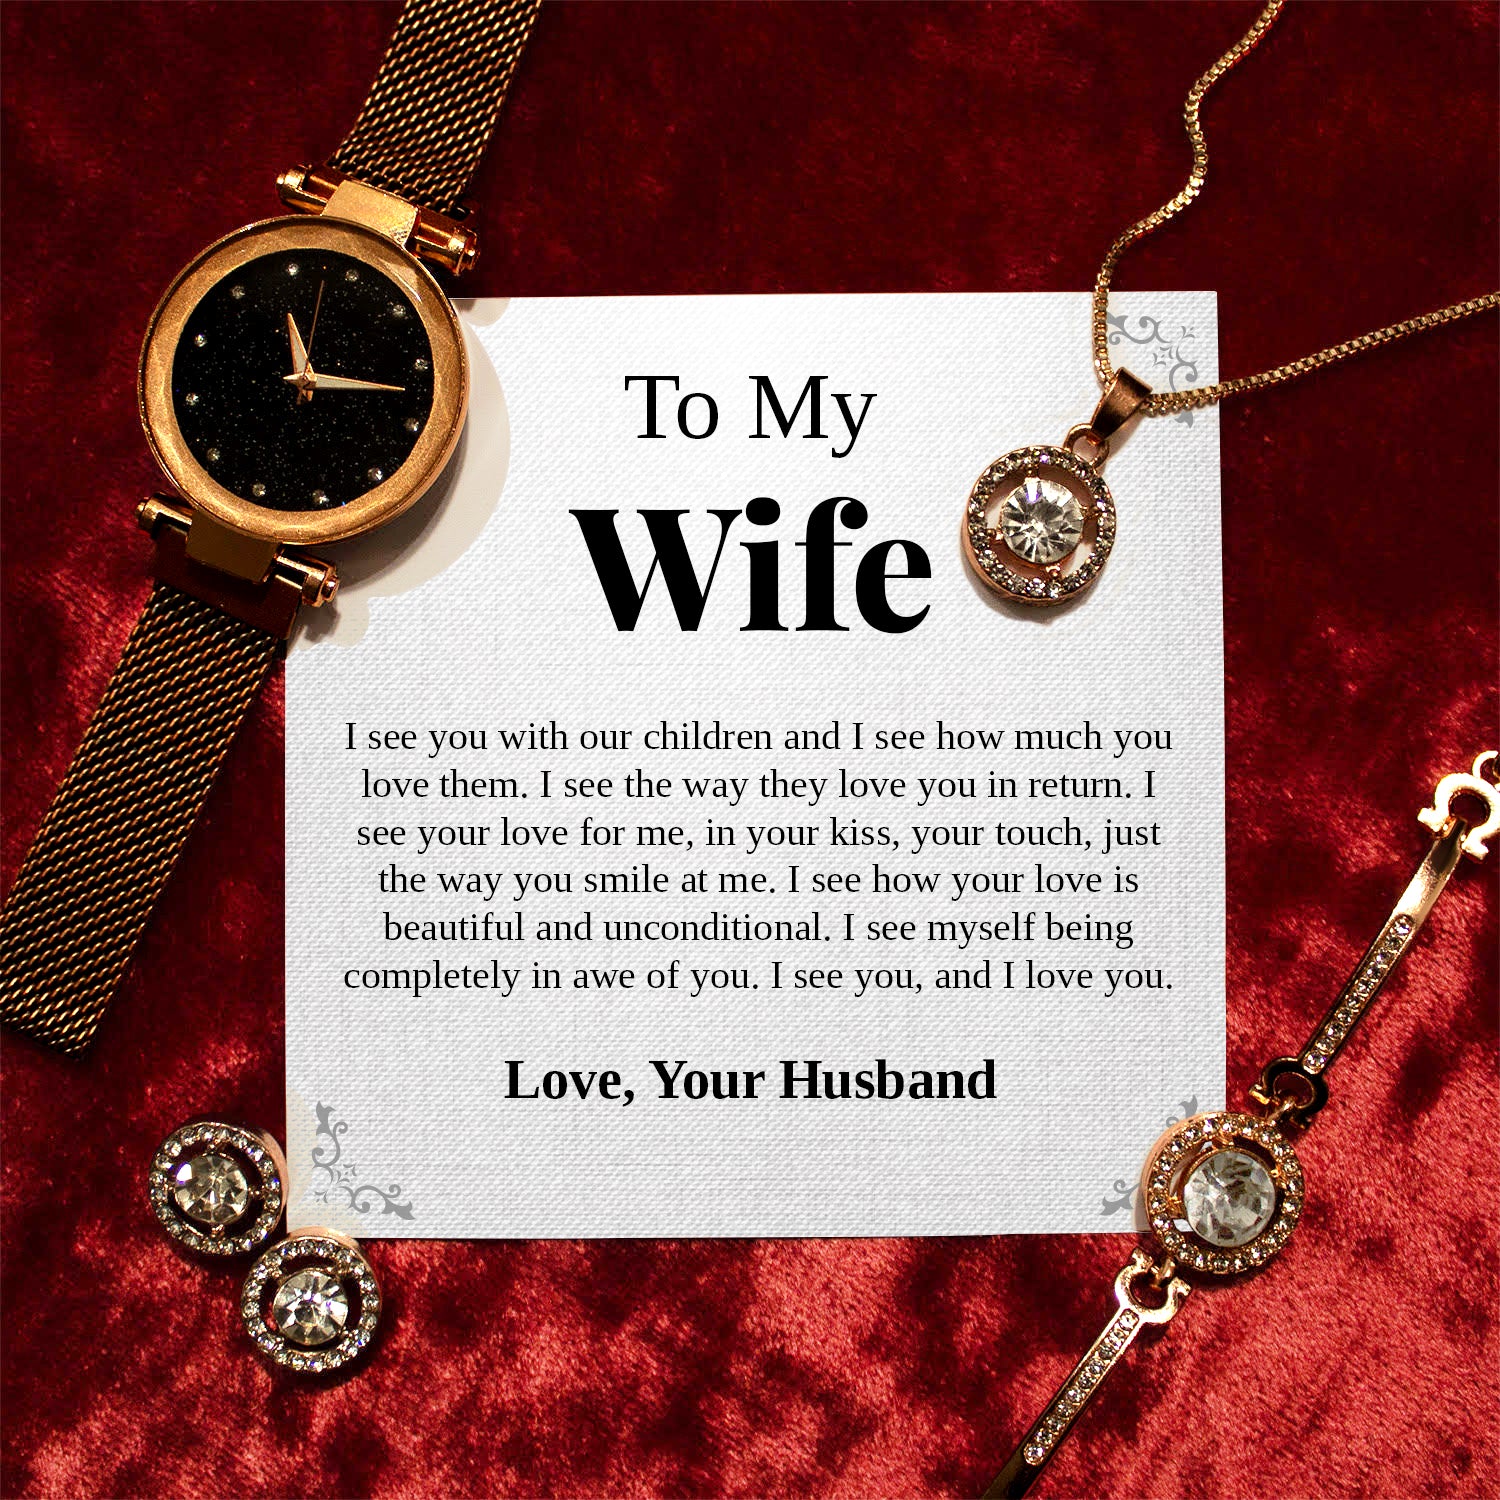 To My Wife | "I See You" | Cosmopolitan Set